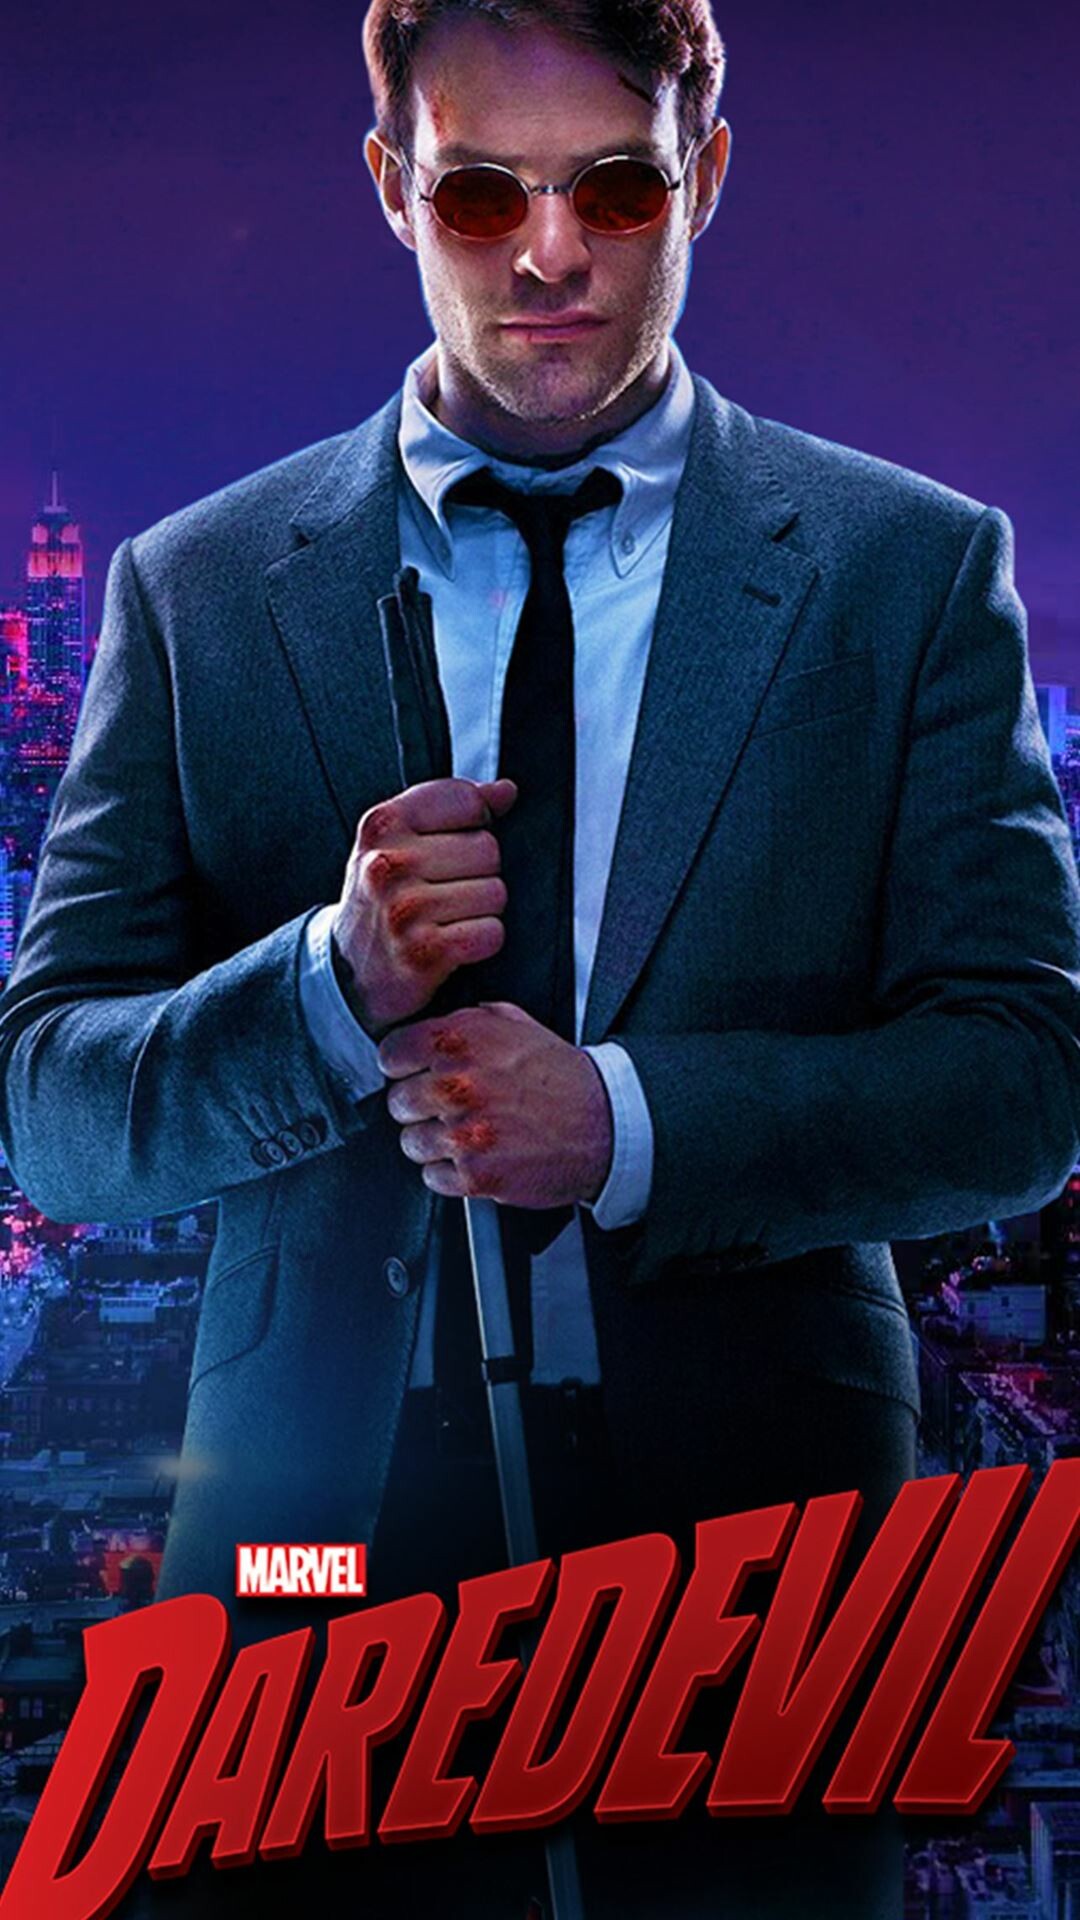 Daredevil (TV Series): An American web television show based on the Marvel Comics superhero of the same name. 1080x1920 Full HD Wallpaper.